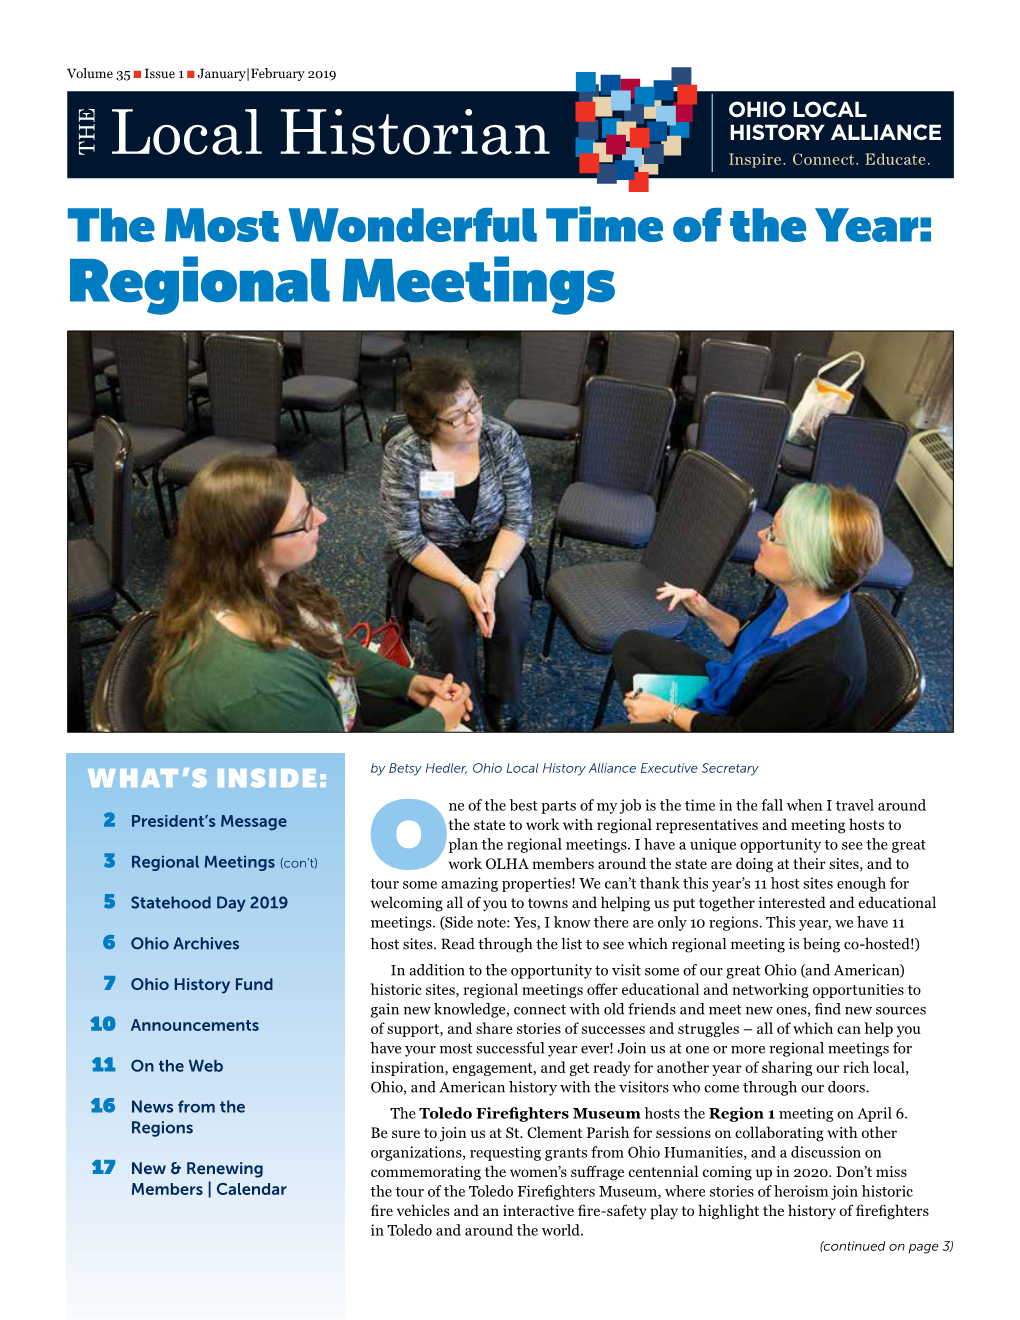 The Most Wonderful Time of the Year: Regional Meetings